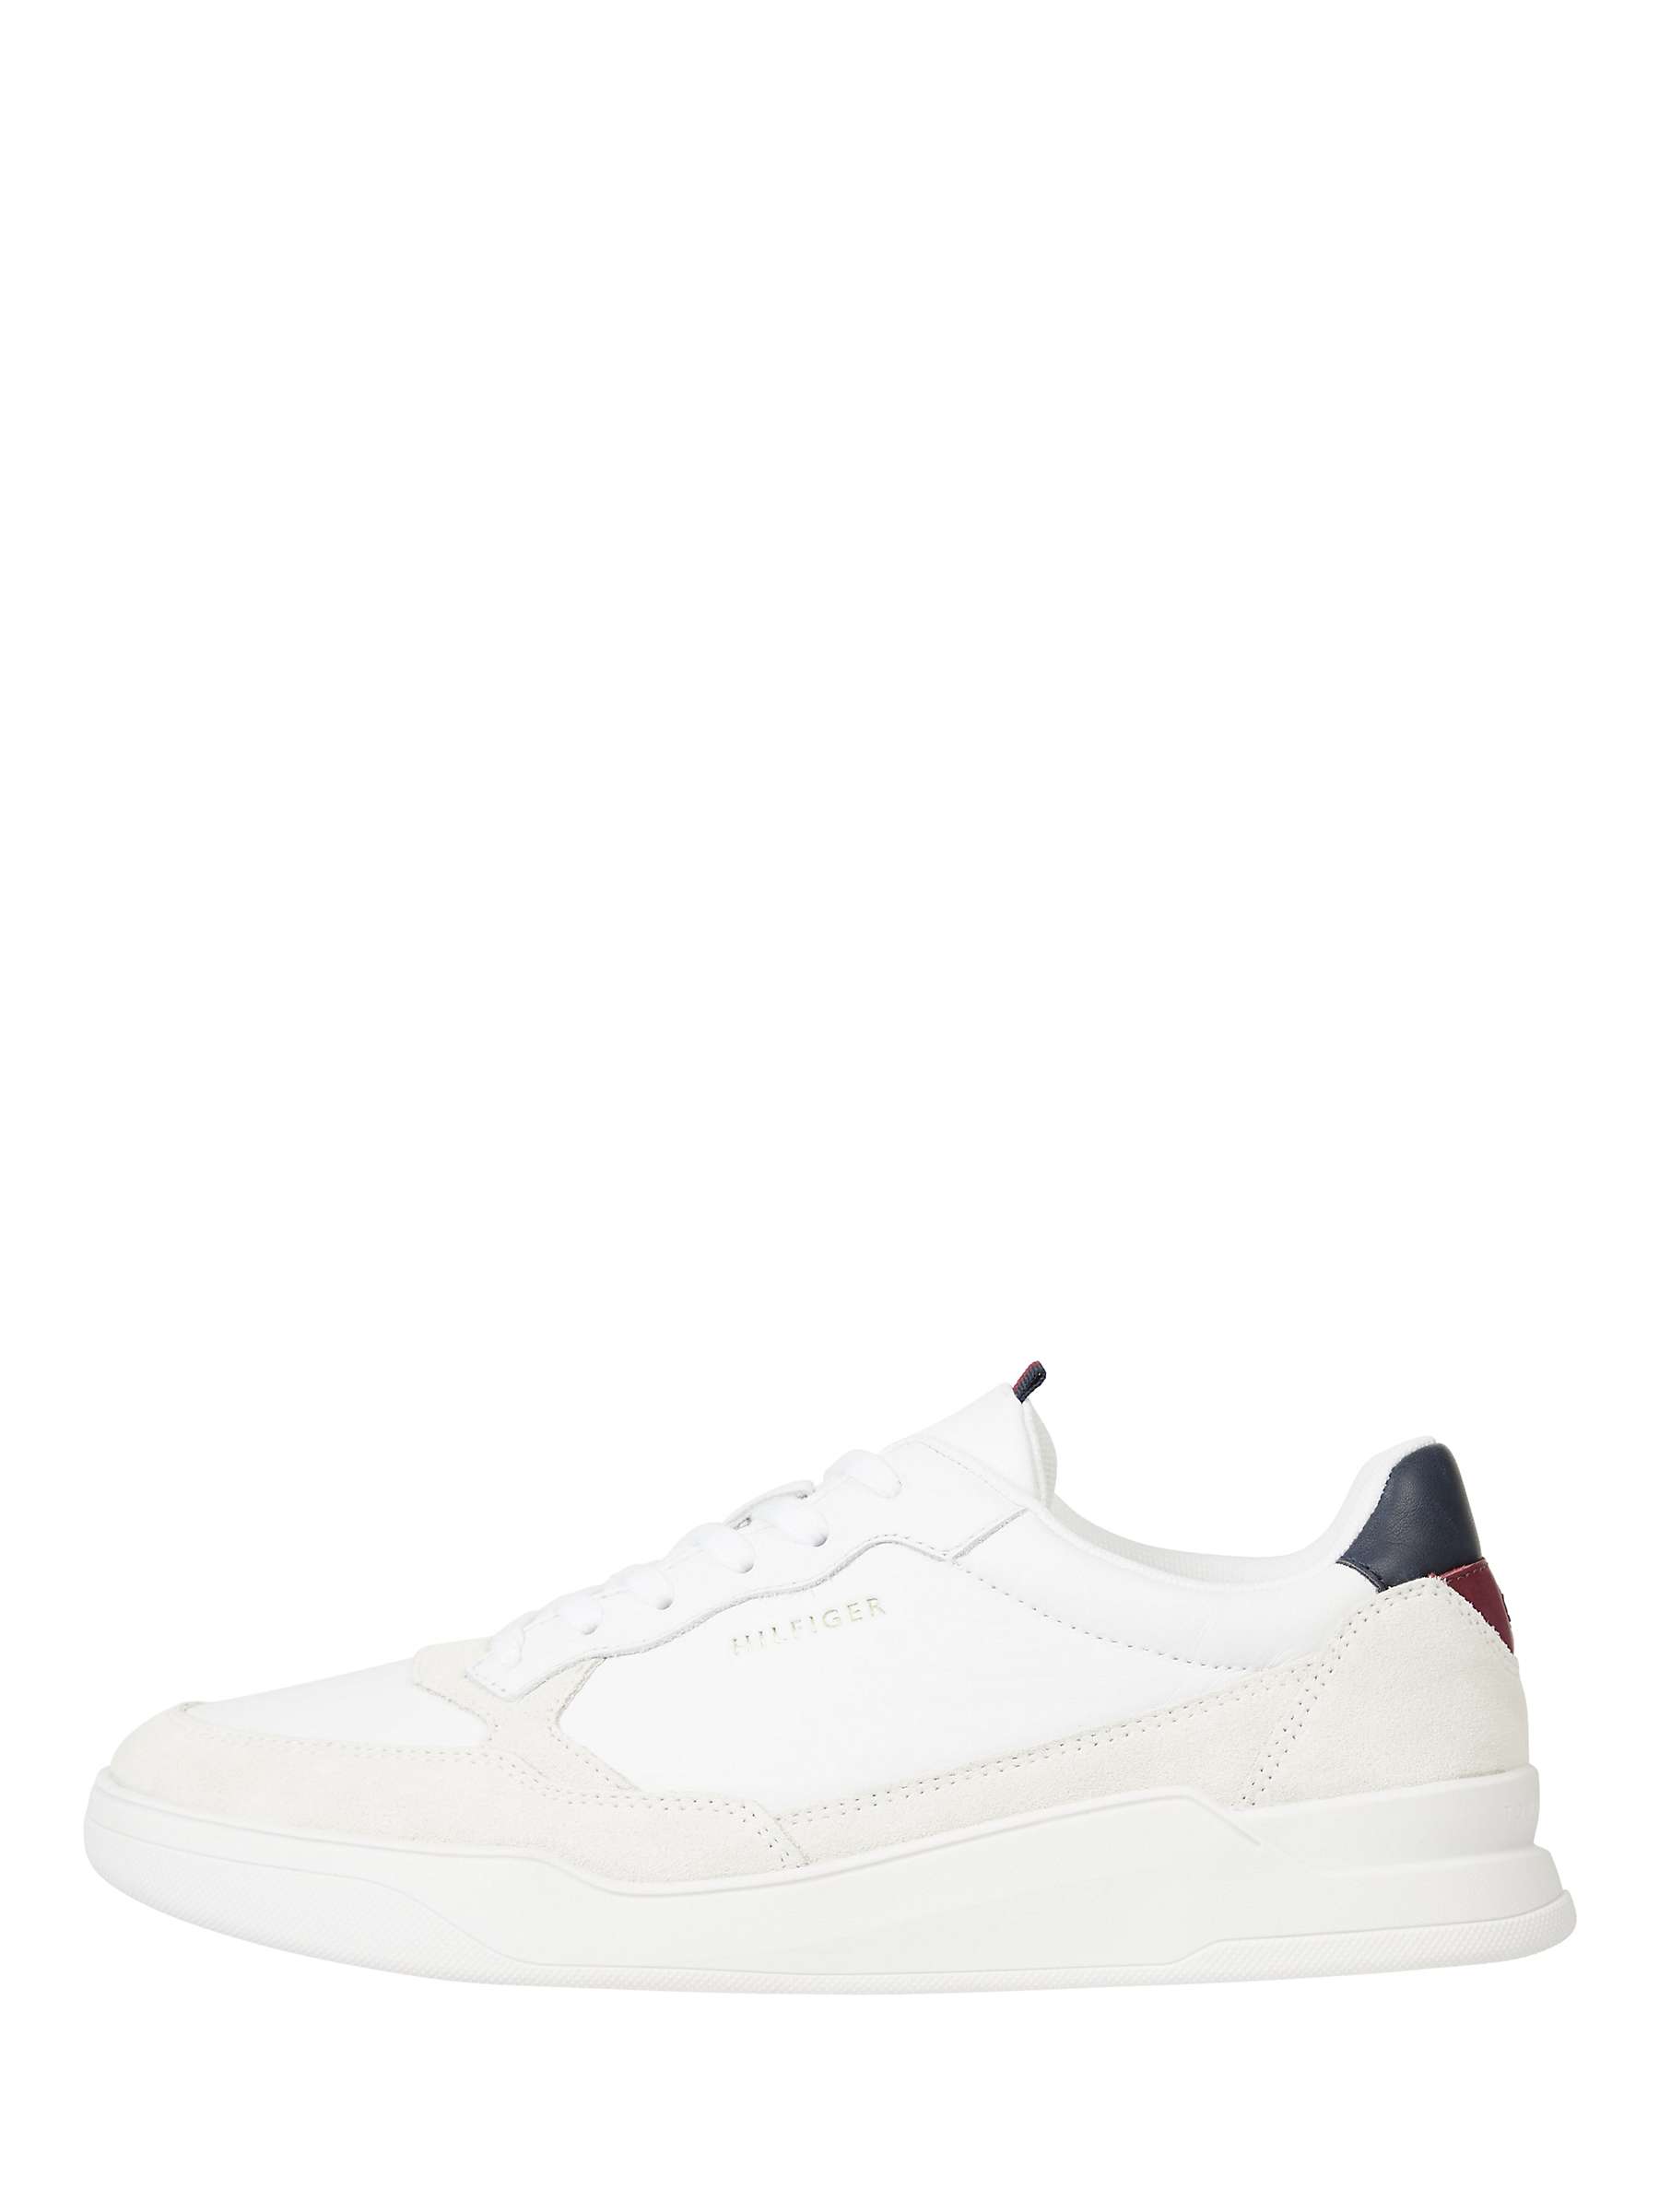 Tommy Hilfiger Leather Elevated Cupsole Lace Up Trainers, White, White ...